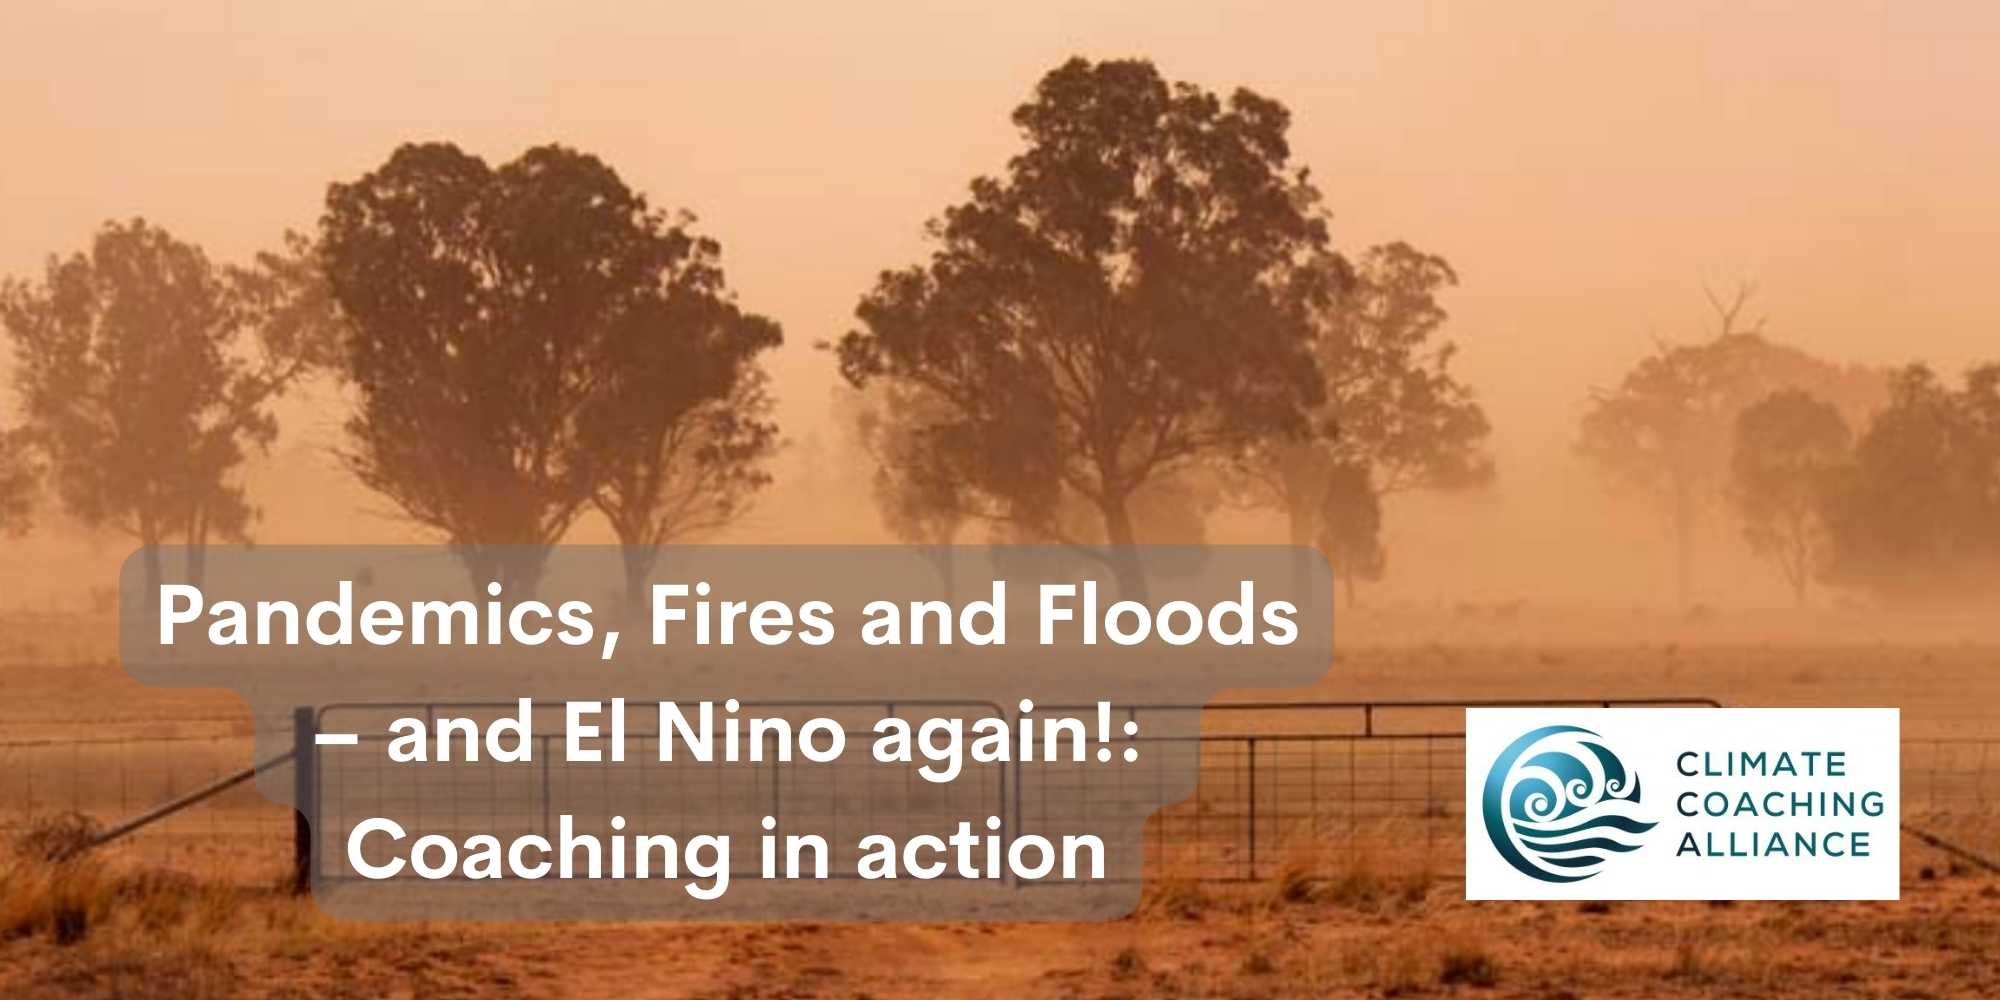 Pandemics, Fires and Floods – and El Nino again!: Coaching in action